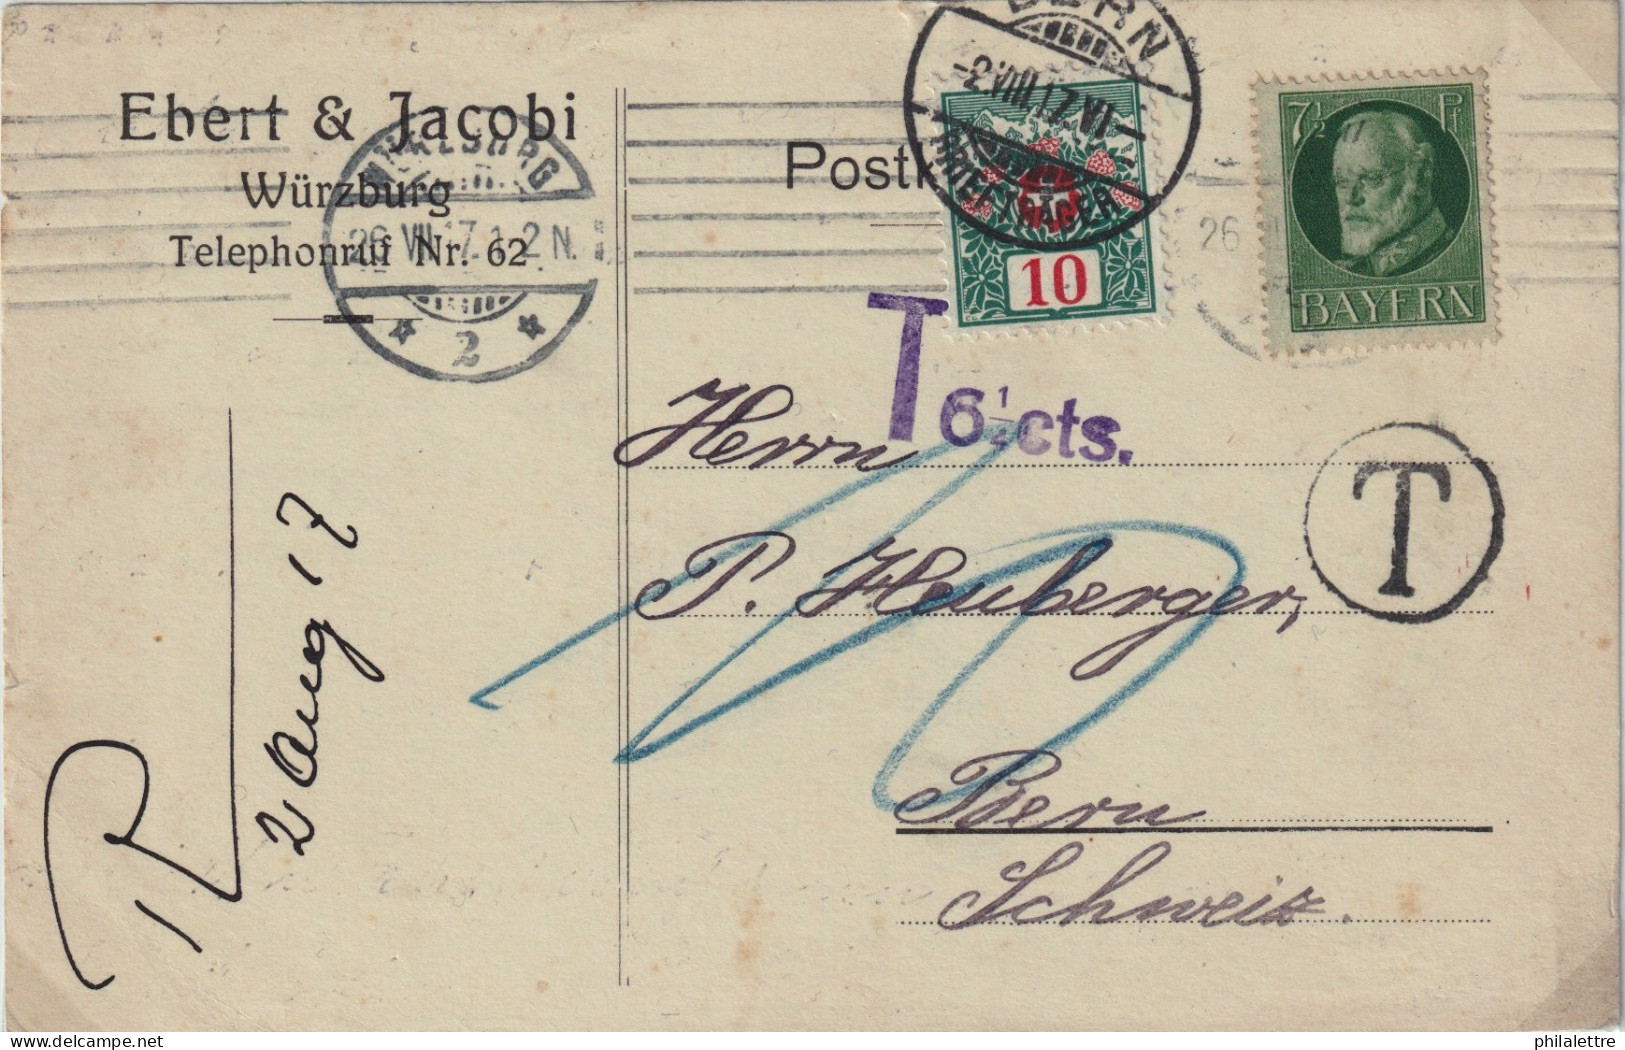 SUISSE / SWITZERLAND 1928 P. Due Mi.32 On PPC From BAVARIA Franked 7-1/2pf With "T 6-1/4cts" Postage Due Mark - Taxe